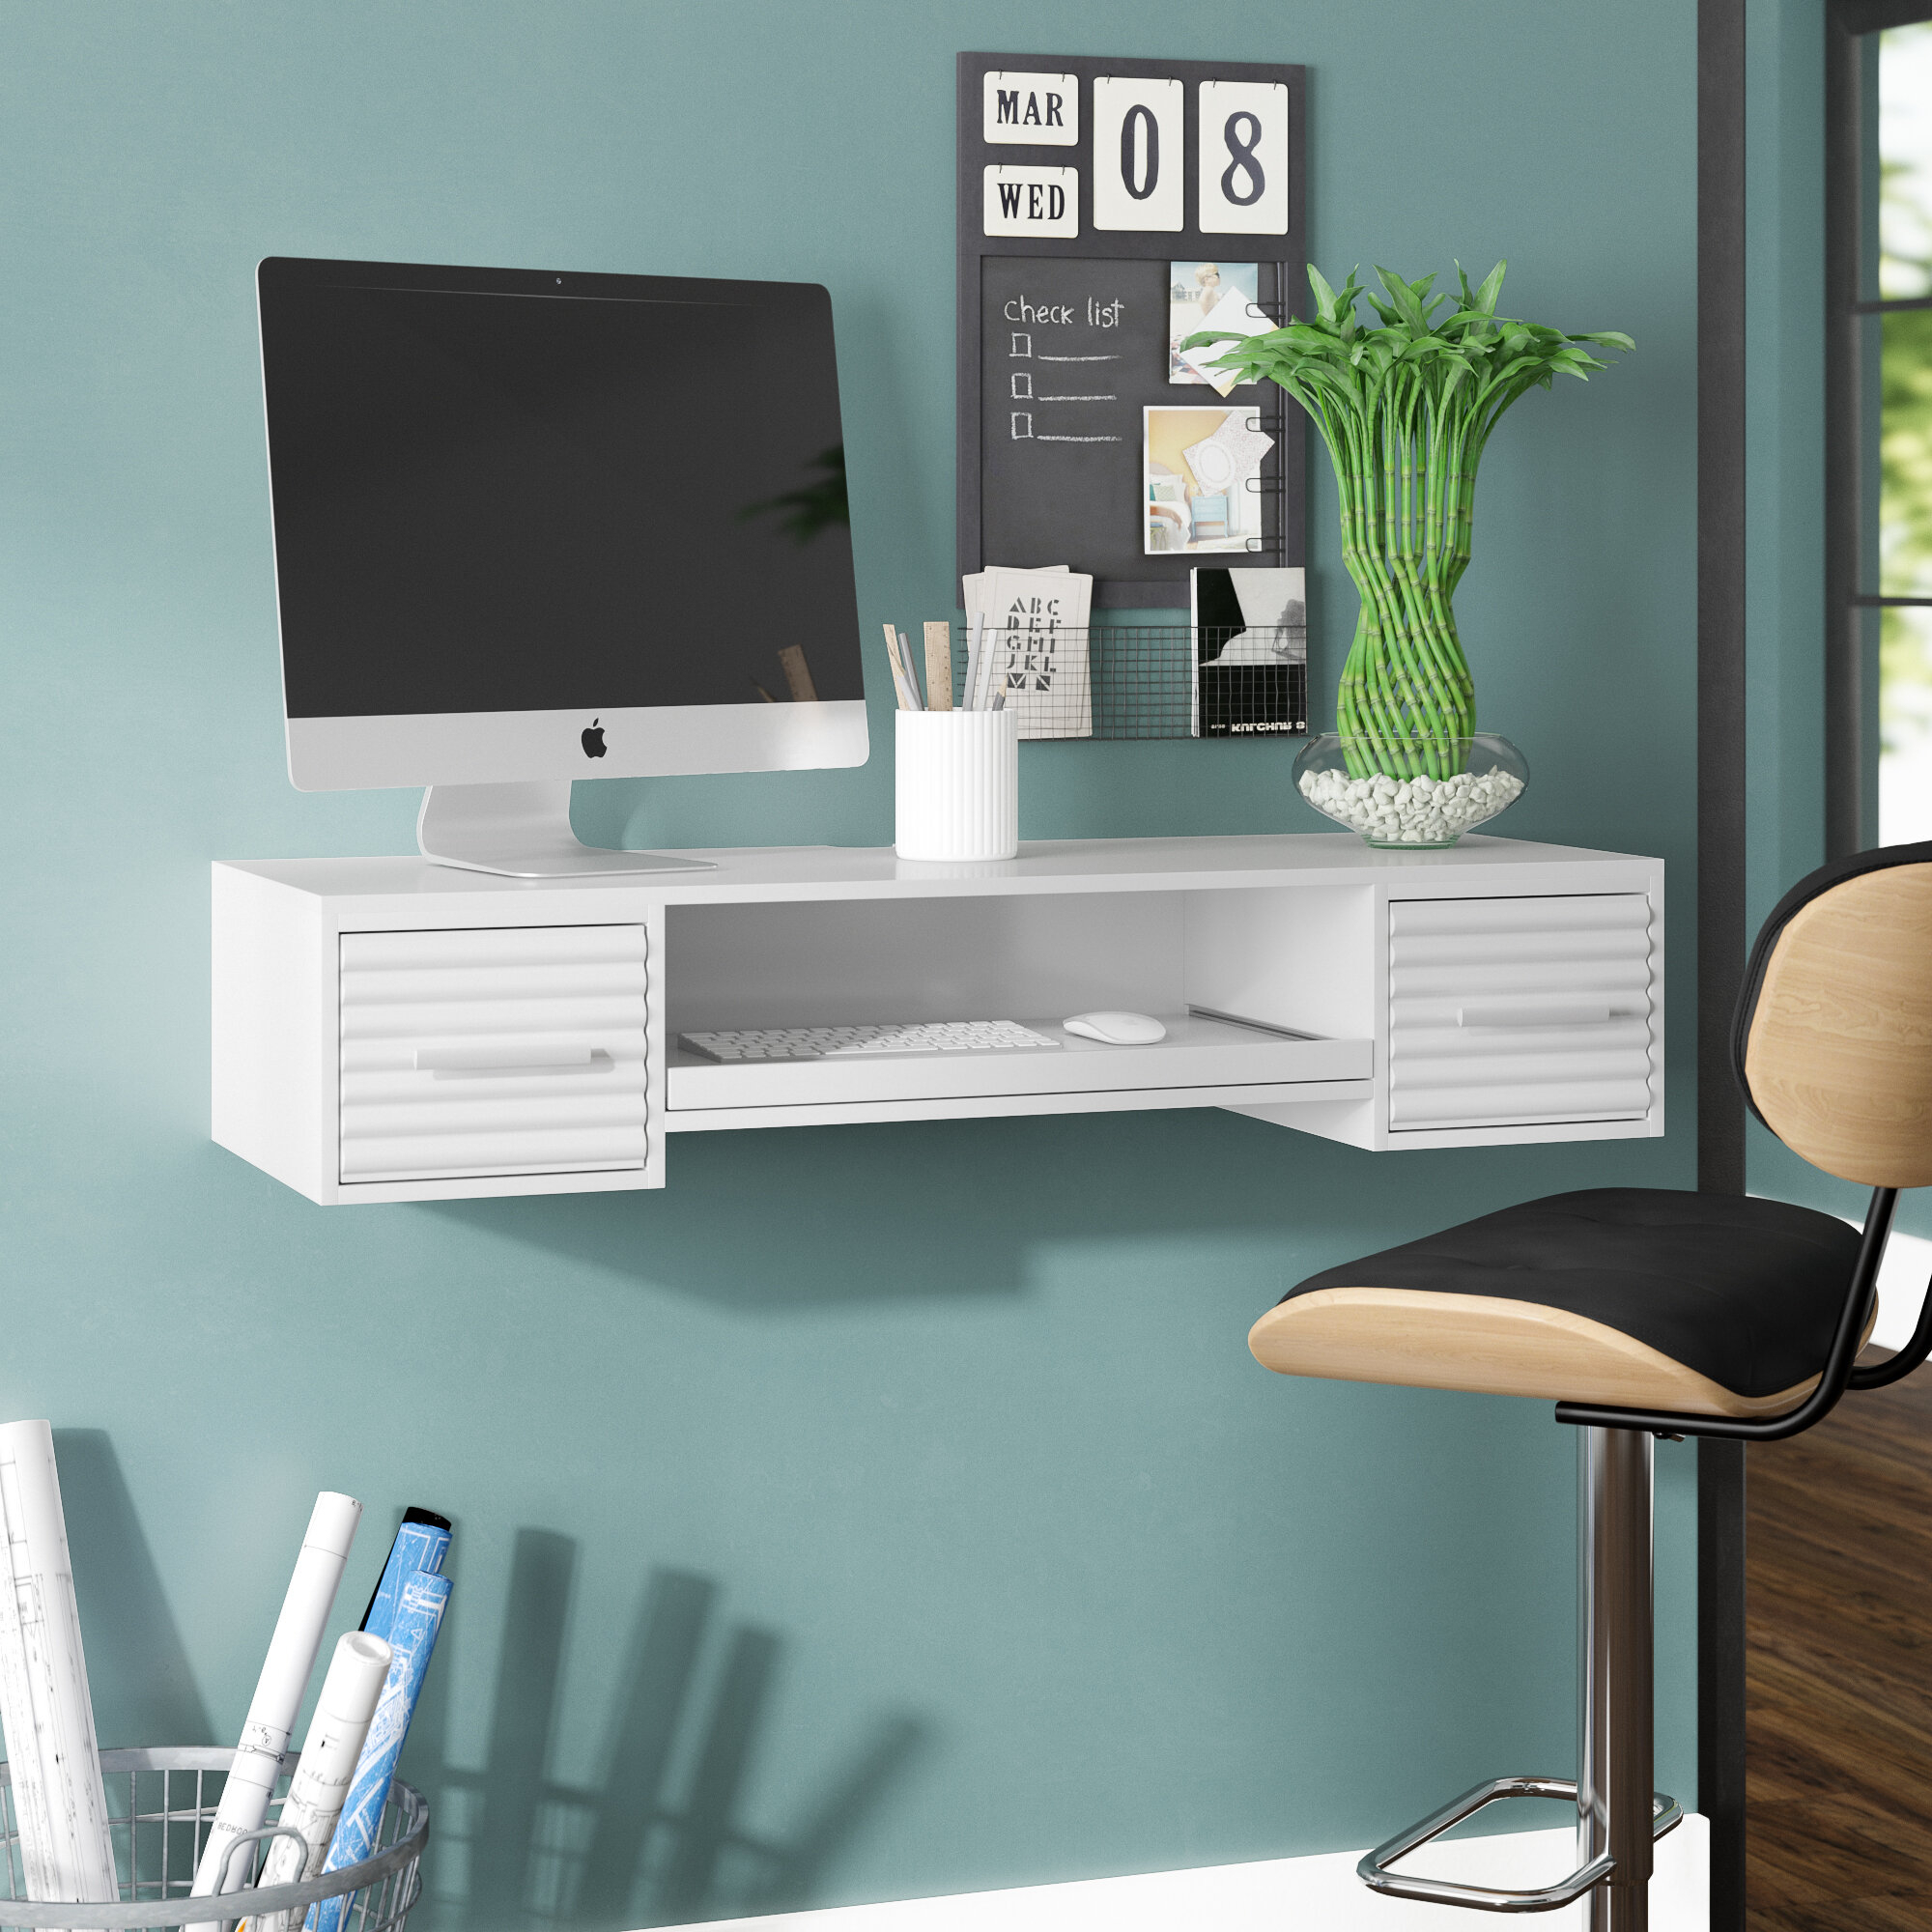 6 Floating Desk Ideas For Small Spaces Visualhunt